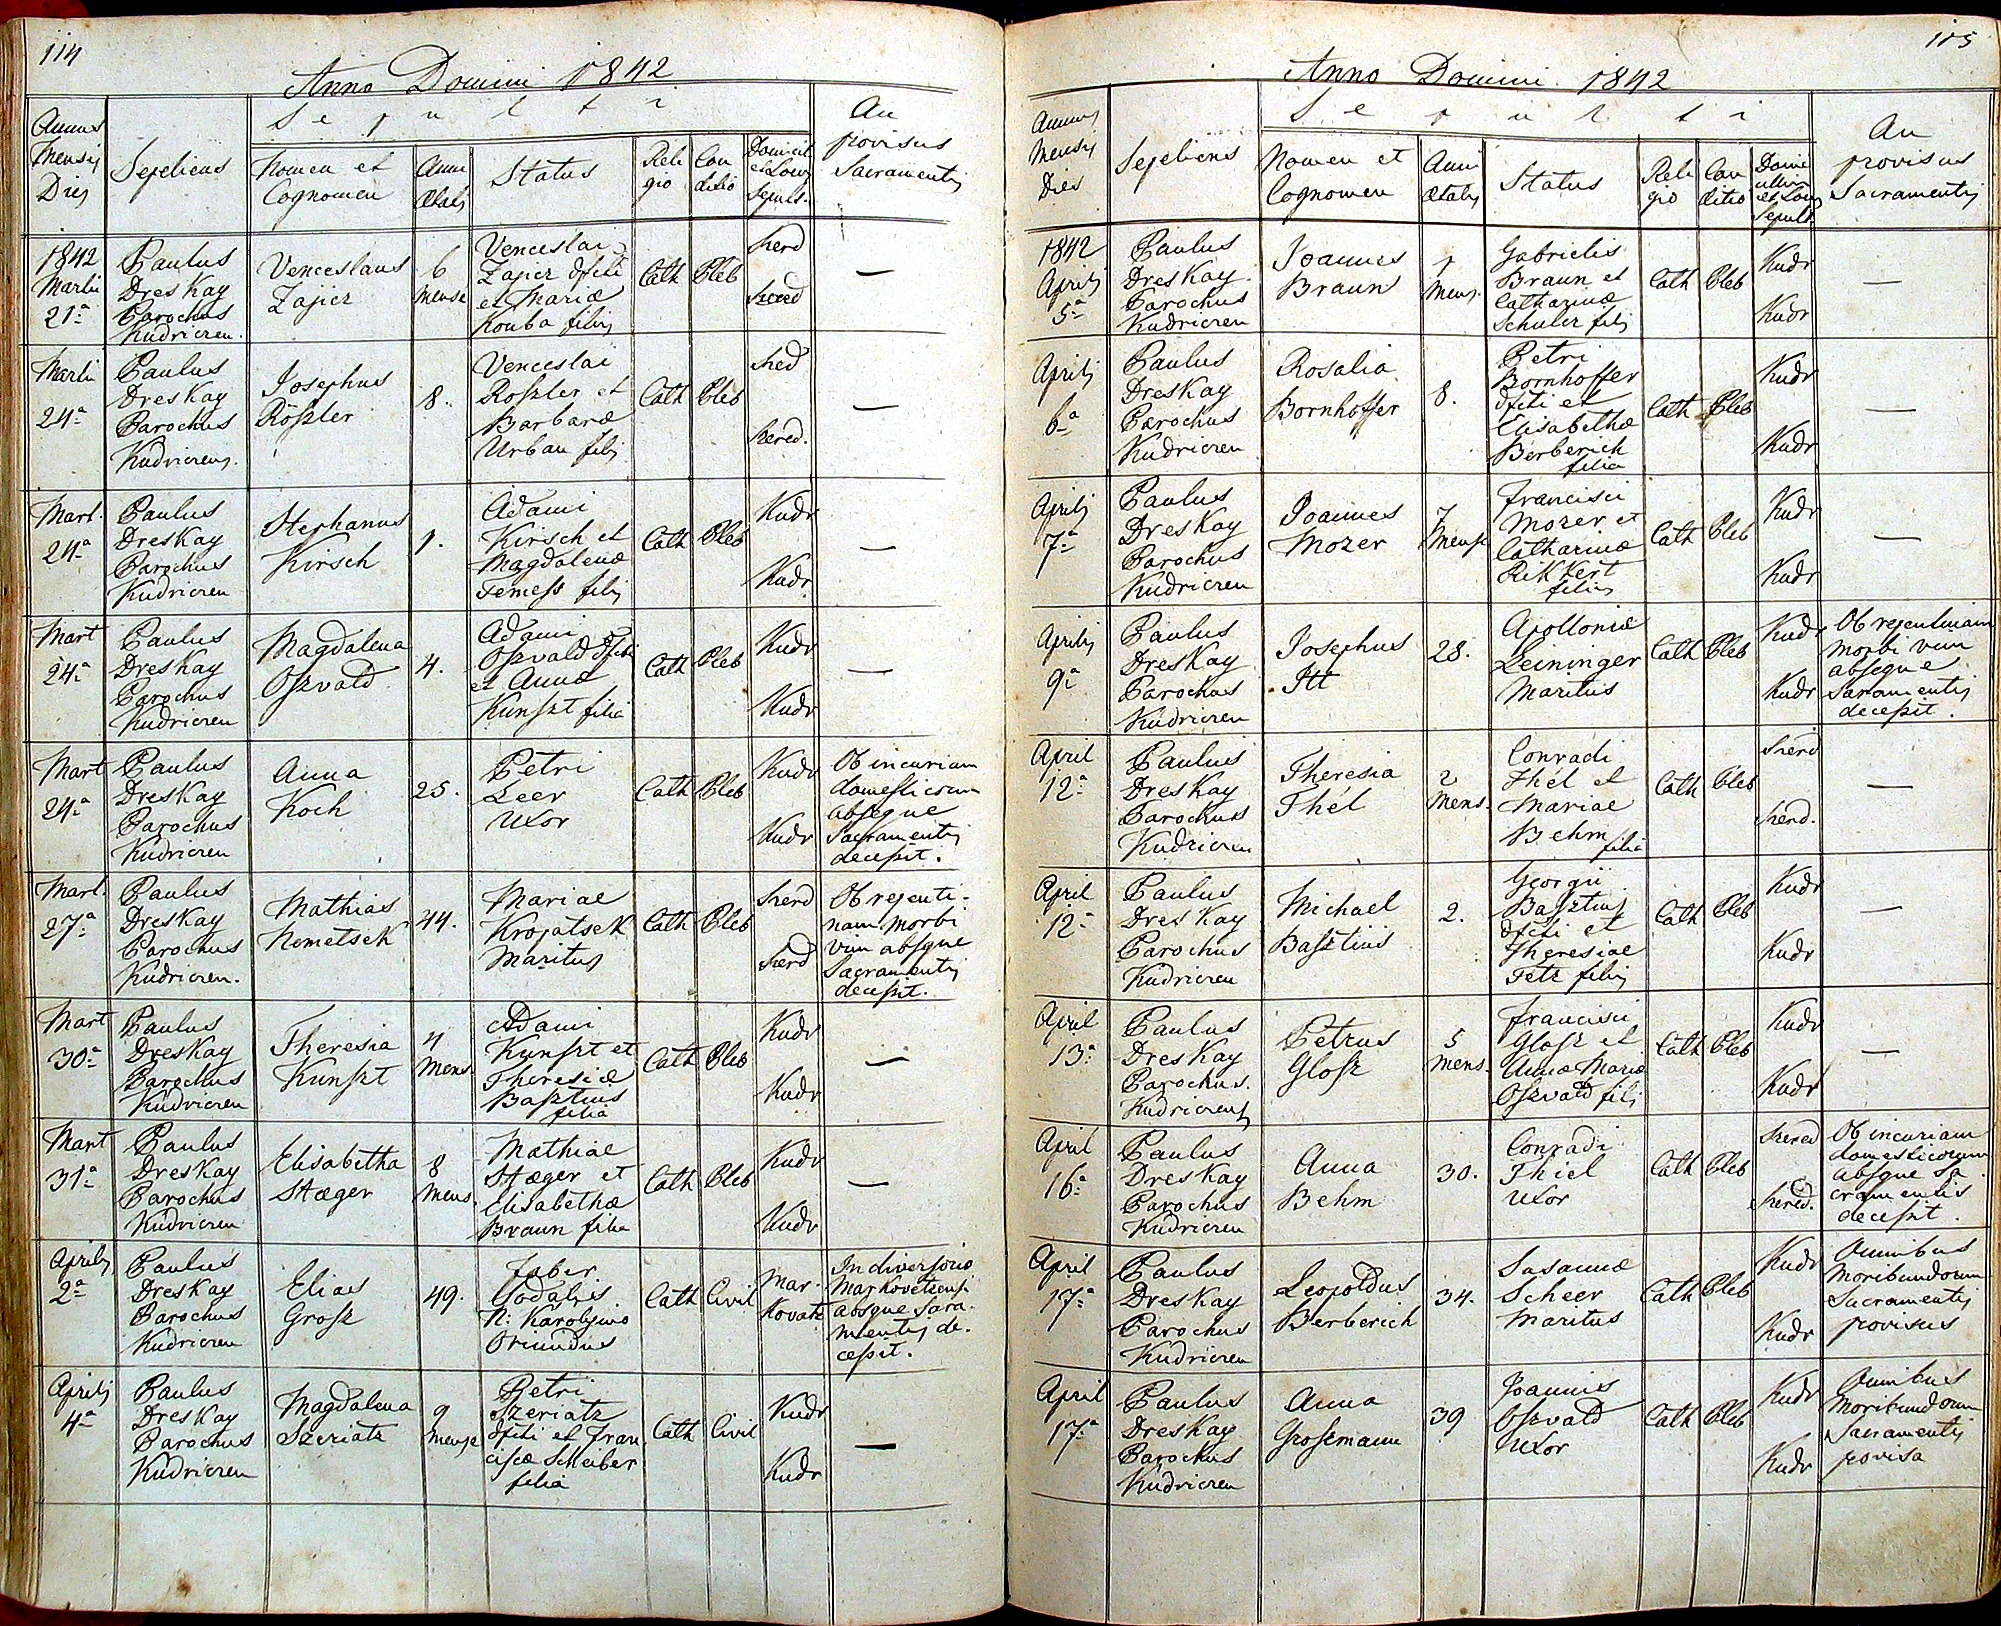 images/church_records/DEATHS/1775-1828D/114 i 115